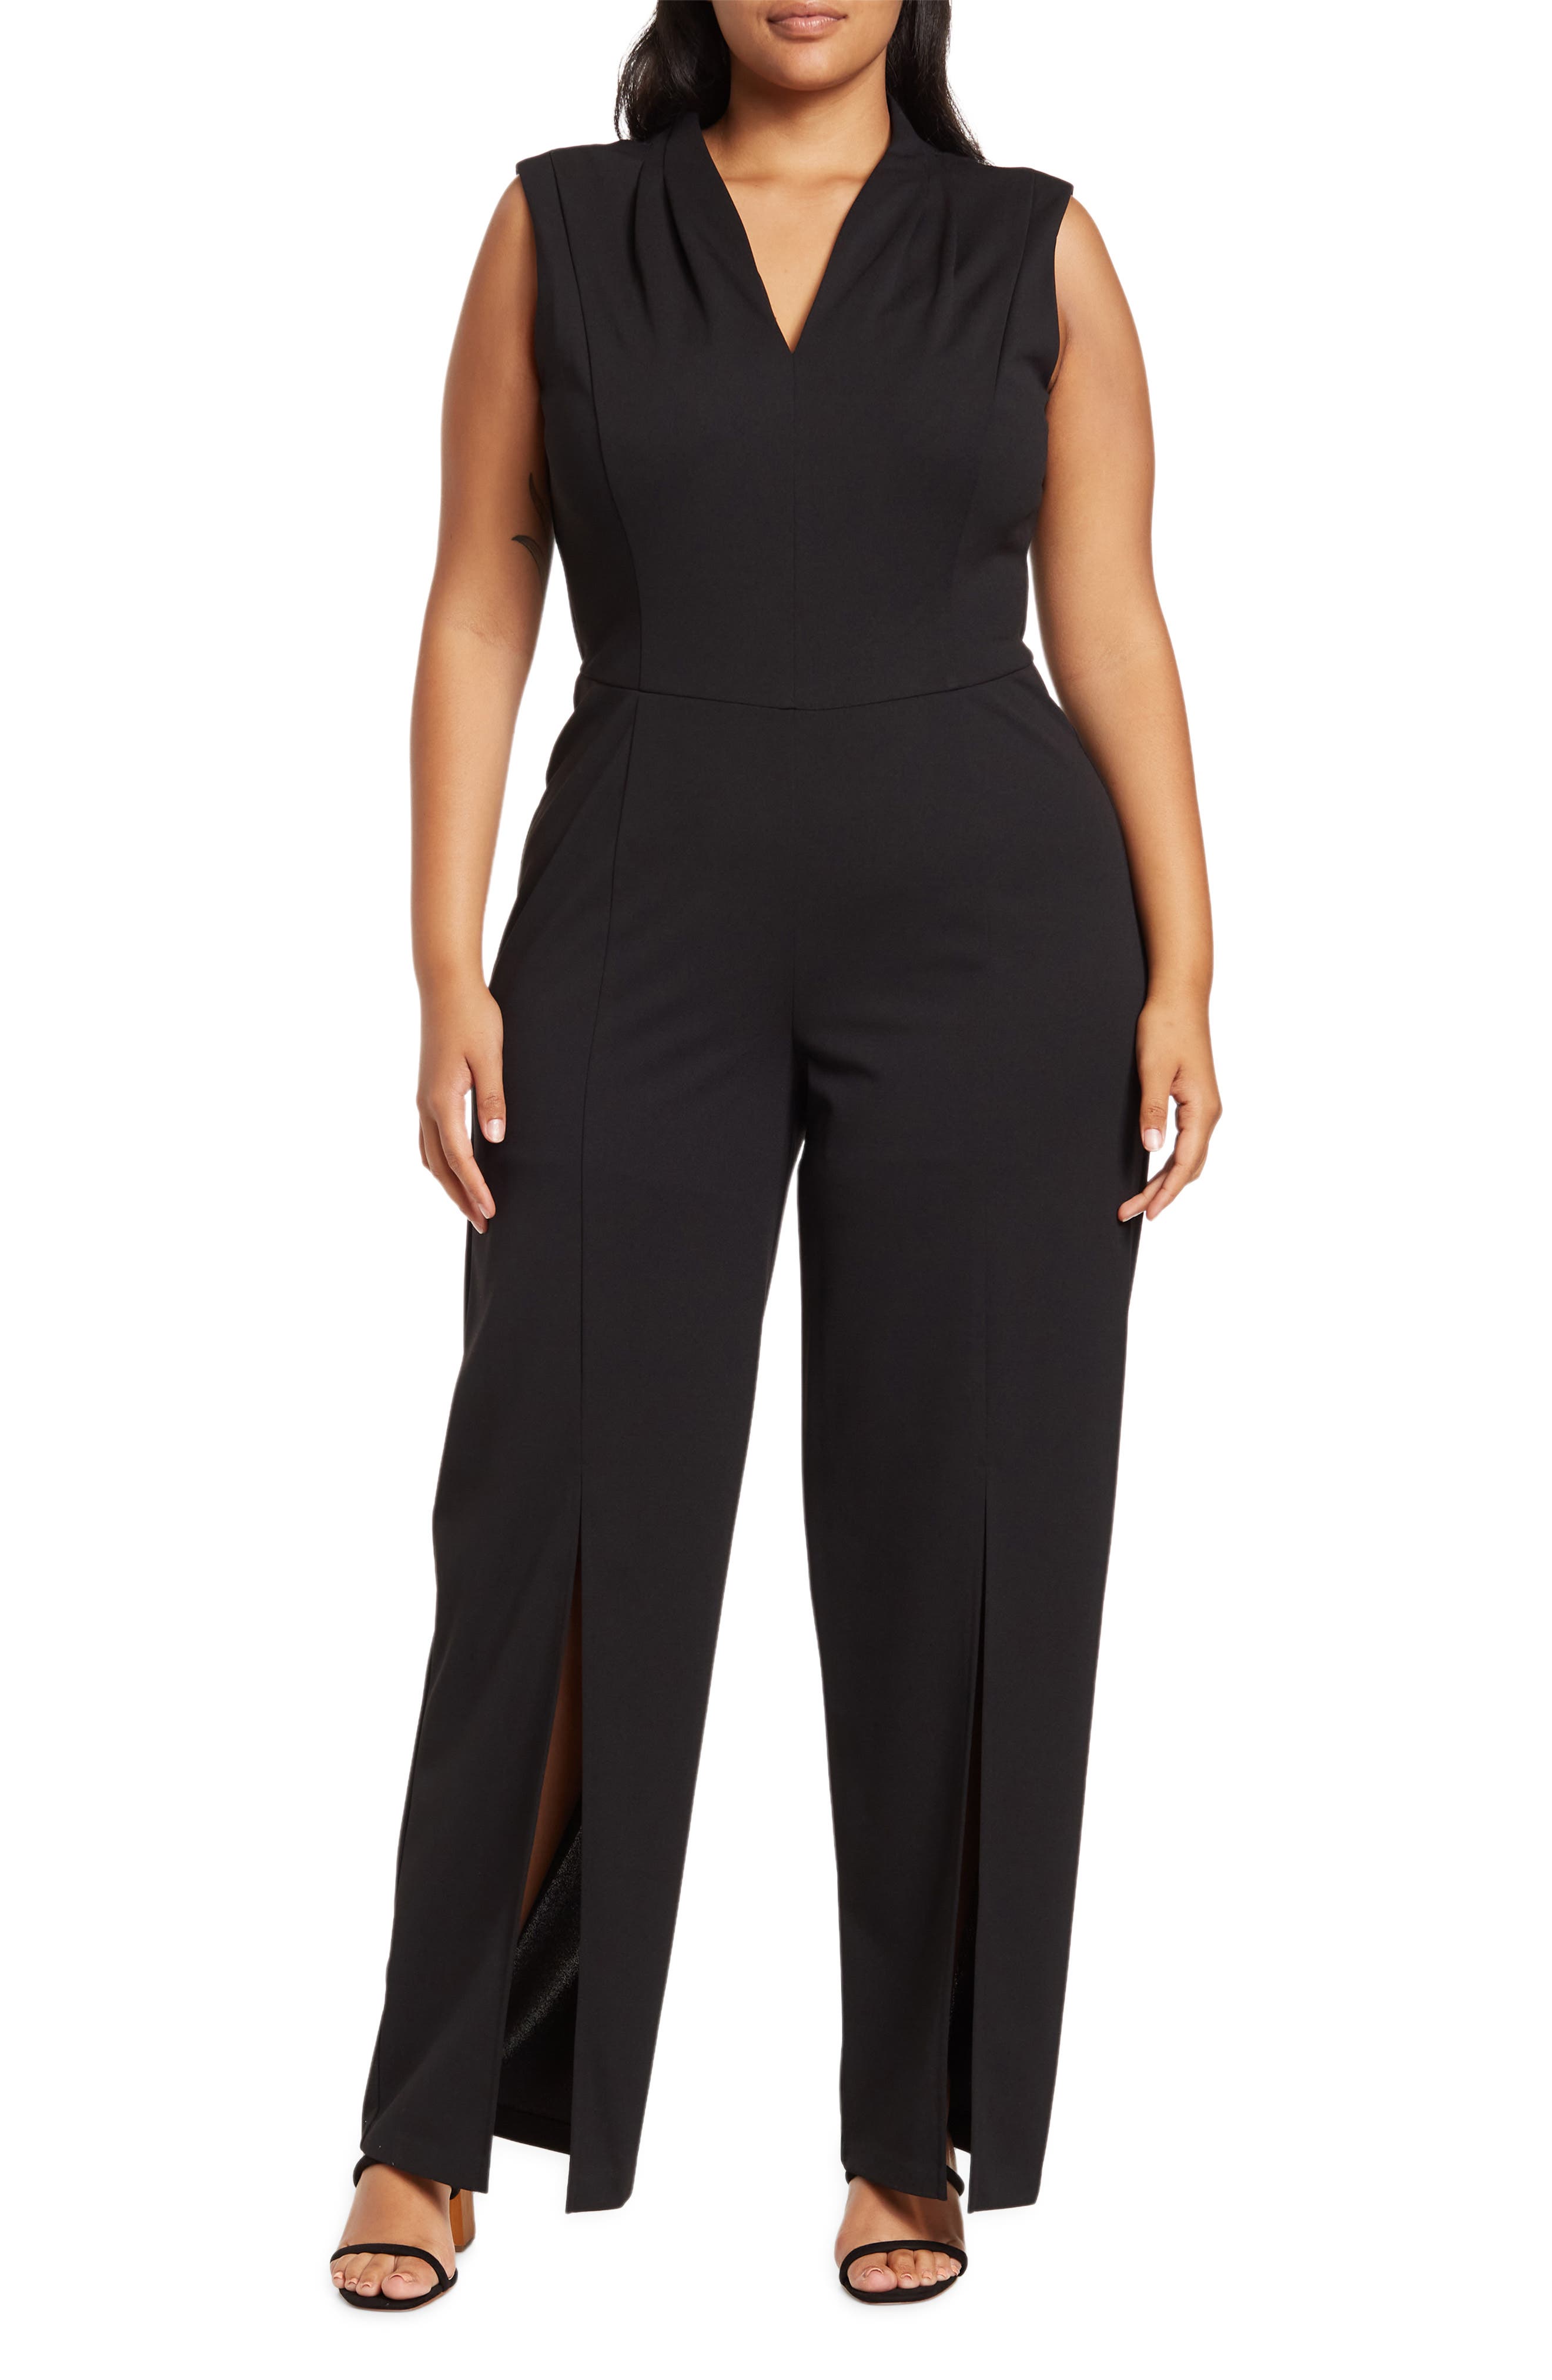 MARIEYAT Synthetic Nylon Jumpsuit in Black Womens Clothing Jumpsuits and rompers Full-length jumpsuits and rompers 